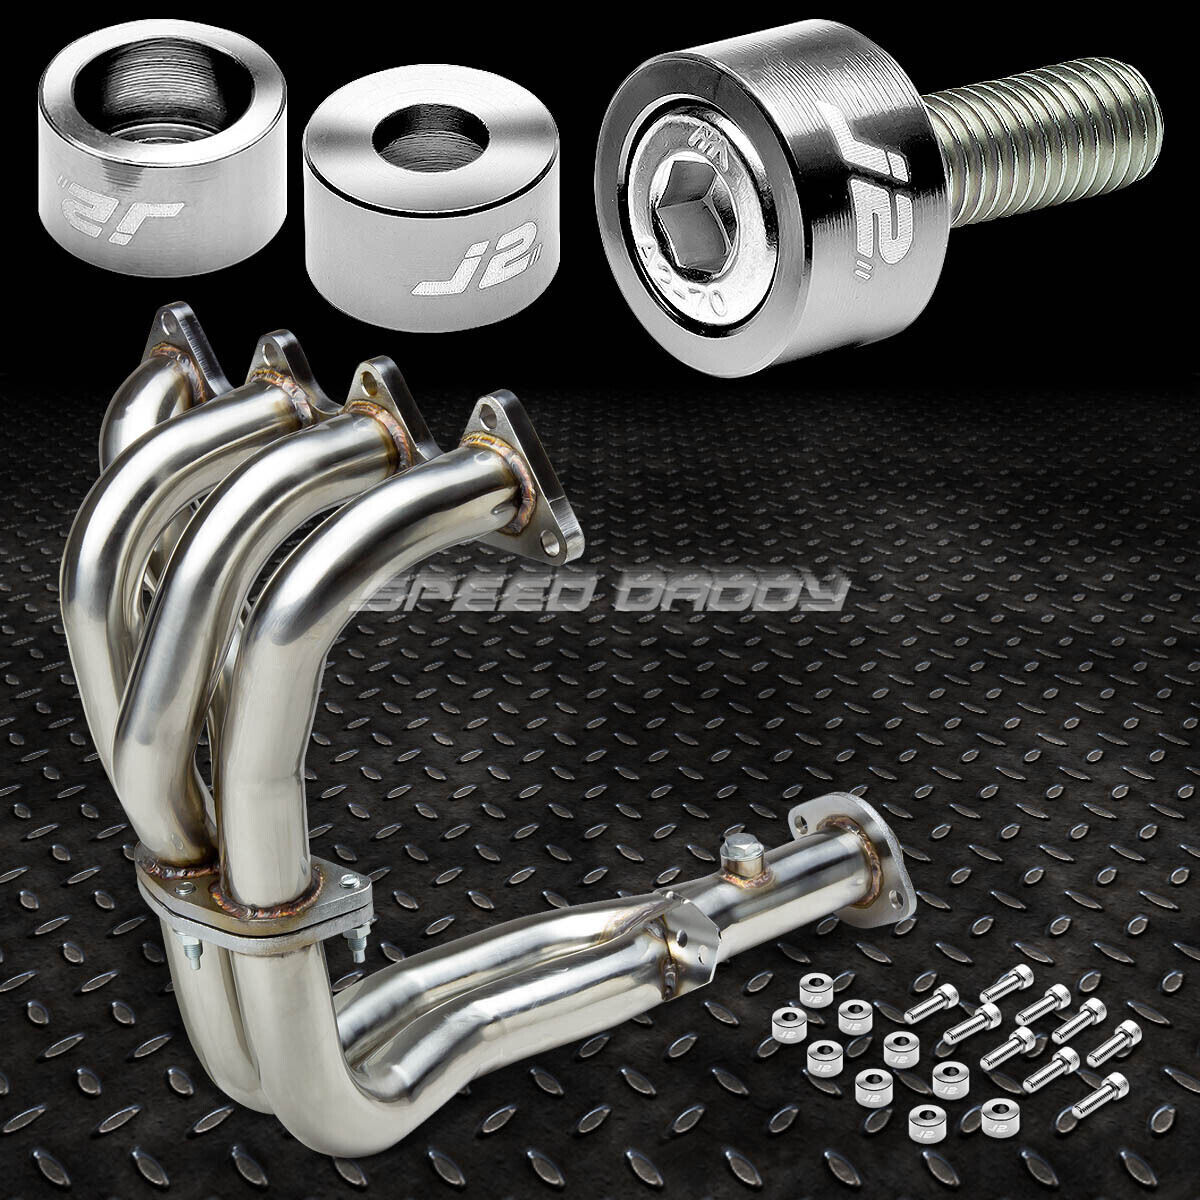 J2 For 92-93 Integra Exhaust Manifold Racing Header+Silver Washer Cup Bolts